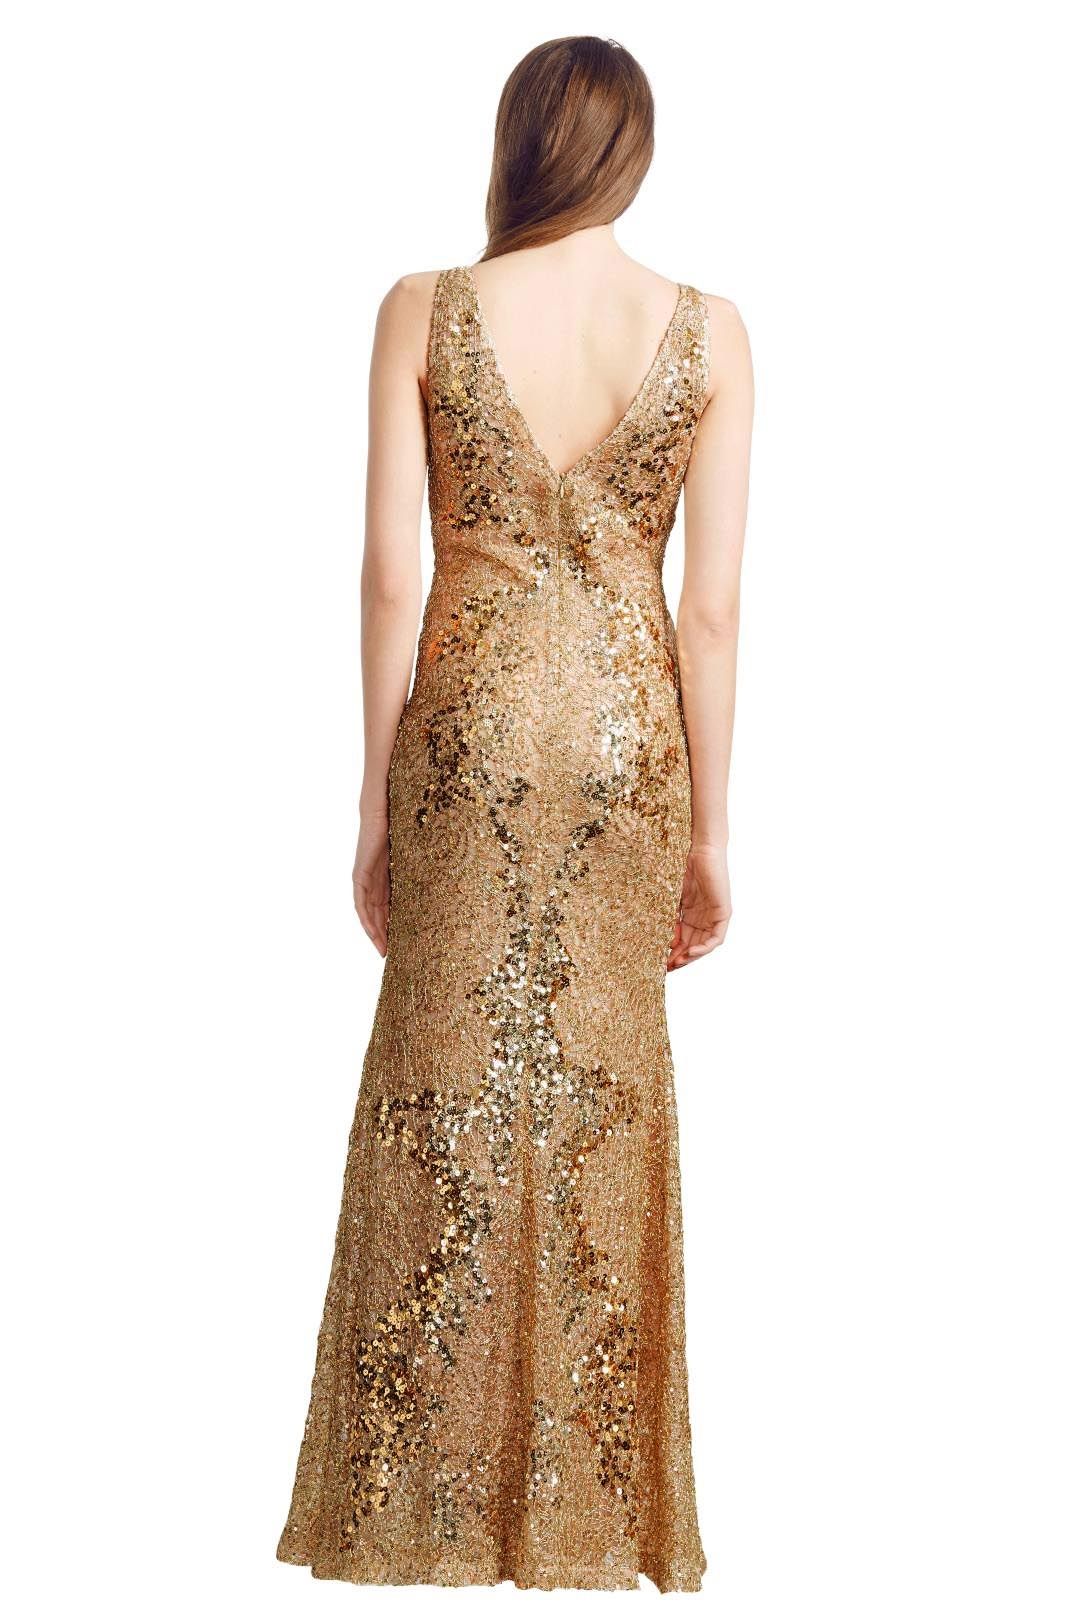 Alex Perry - Midas Gown - Gold - Back